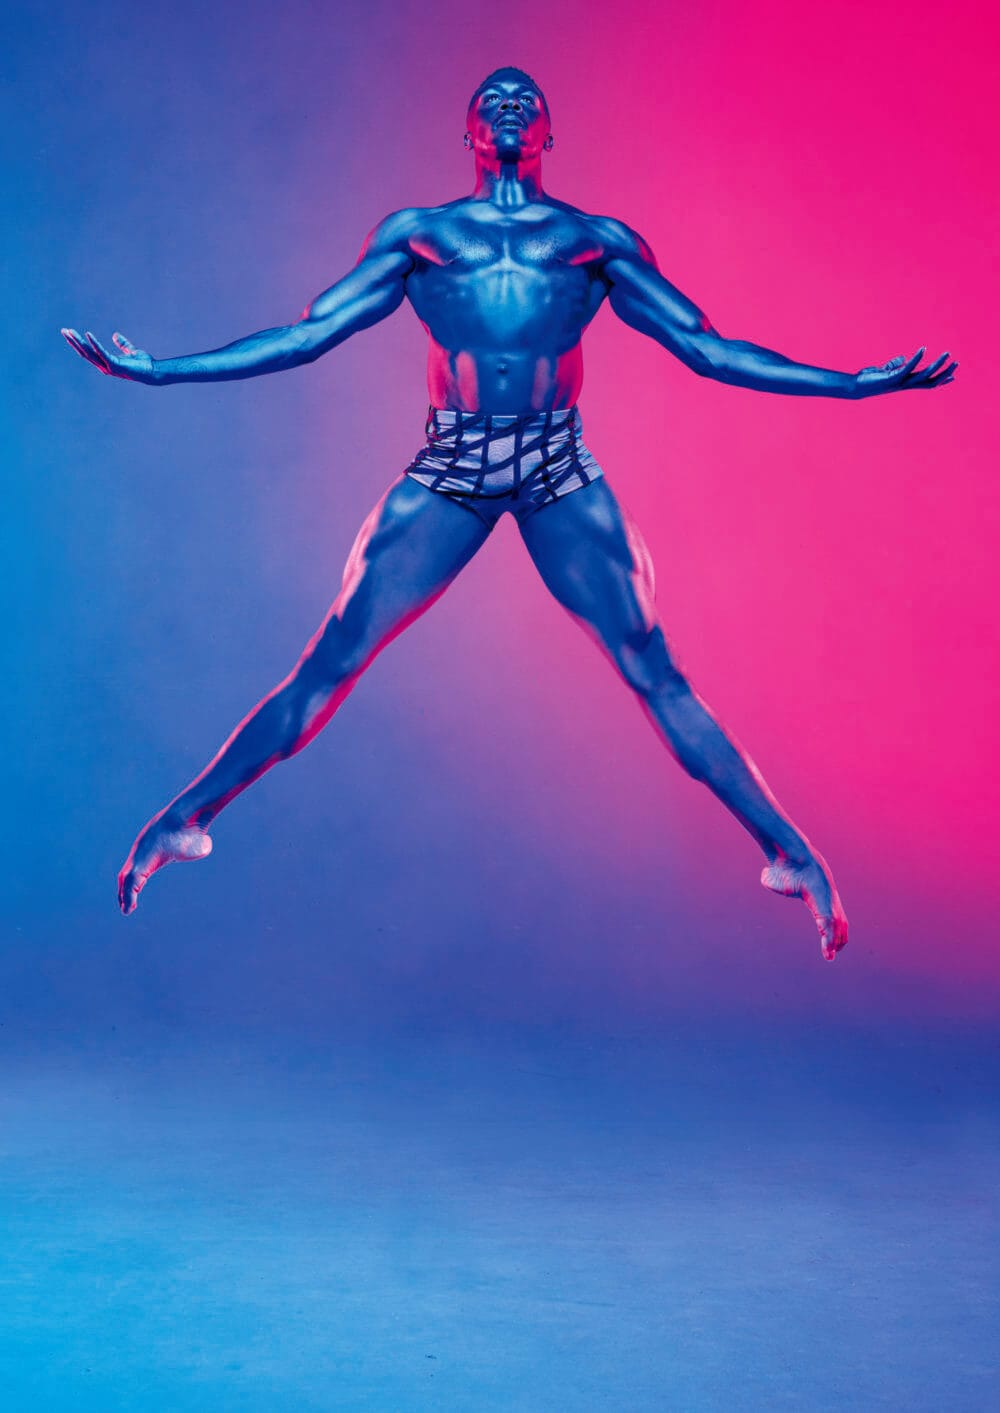 Alvin Ailey American Dance Theater's Michael Jackson, Jr., photo by Andrew Eccles